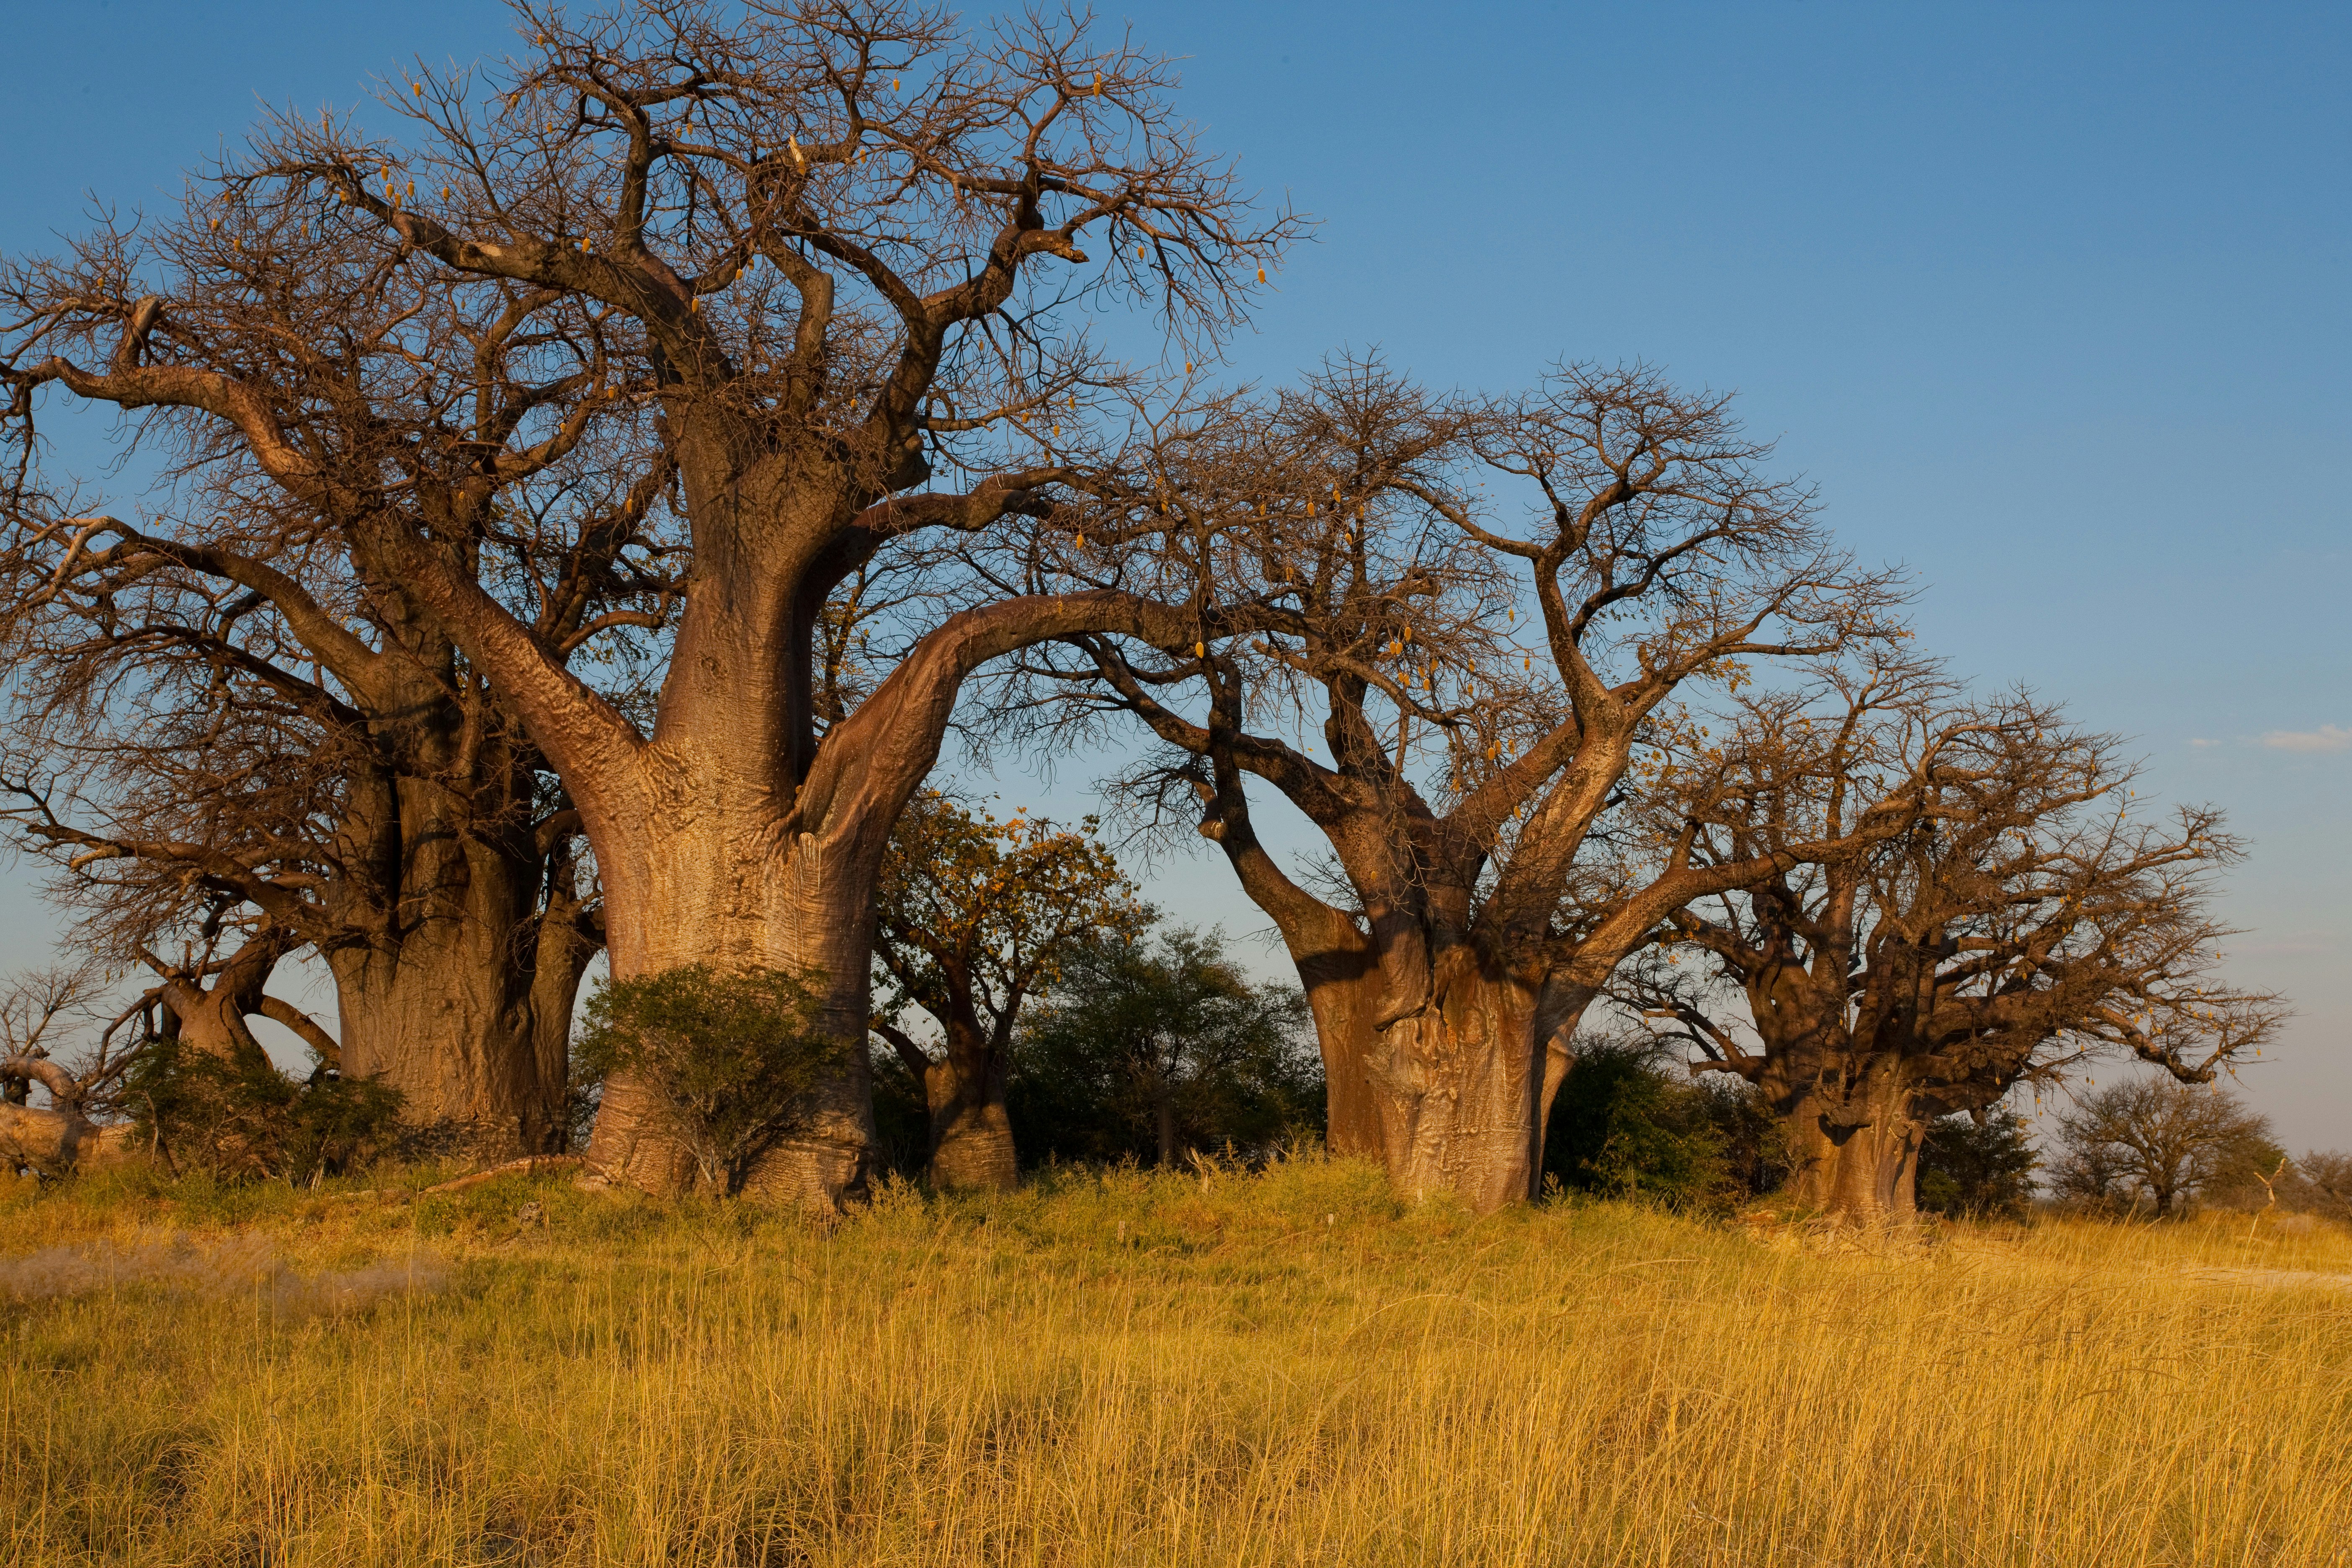 Baobab trees, with huge thick trucks, rise up from the plains in Nxai Pan National Park, Botswana